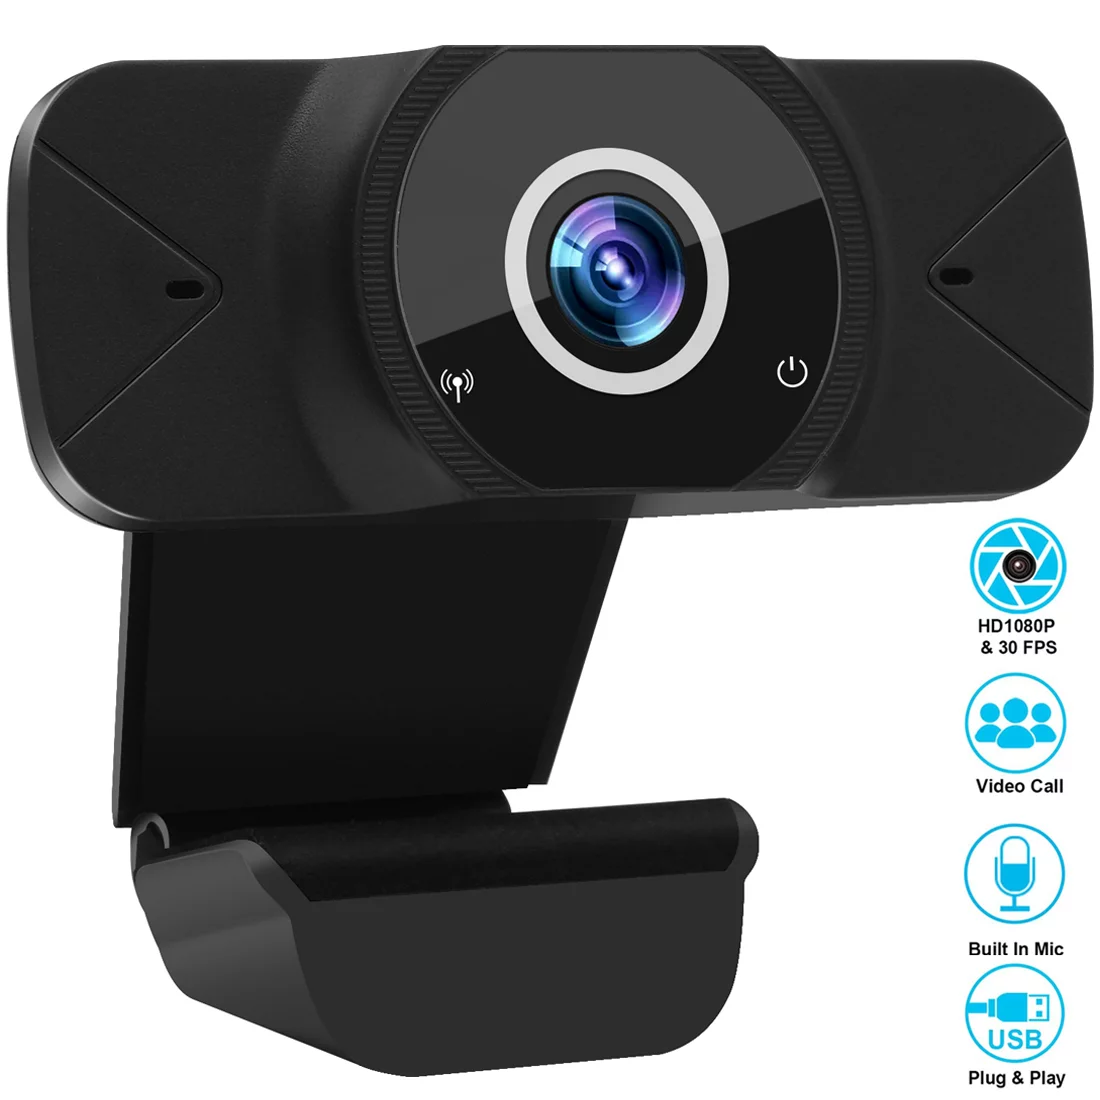 USB Webcam with Microphone, Webcam 1080P Full HD Web Cameras for PC Computers Desktop Laptop PC Webcam, Plug and Play, AutoFocus Web Camera for Video Calling, Conferencing, Recording, Gaming(W7)